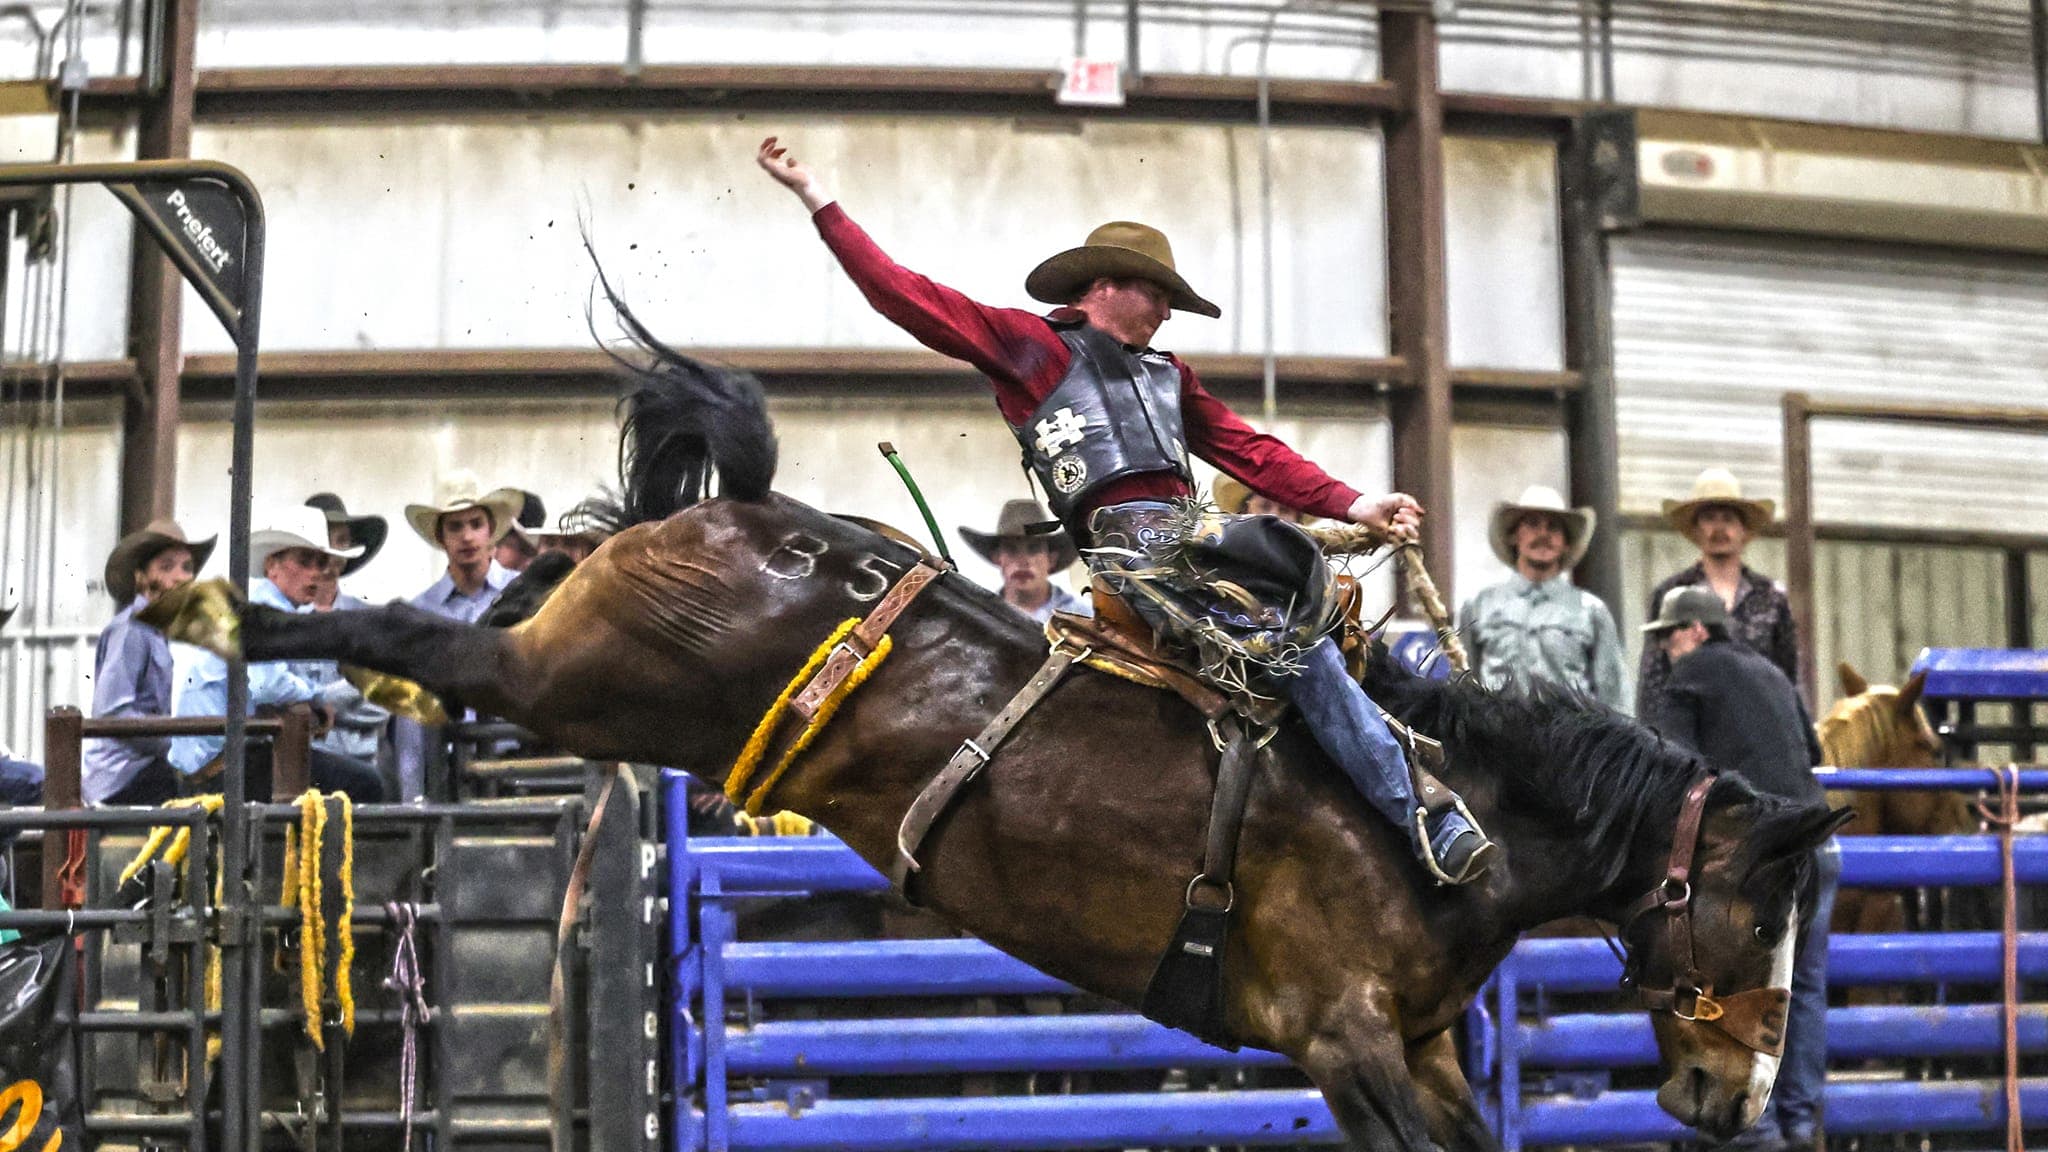 Jake Finlay rode Dakota Rodeo's Bobs Alibi, delivering an impressive 89-point ride for the win. 